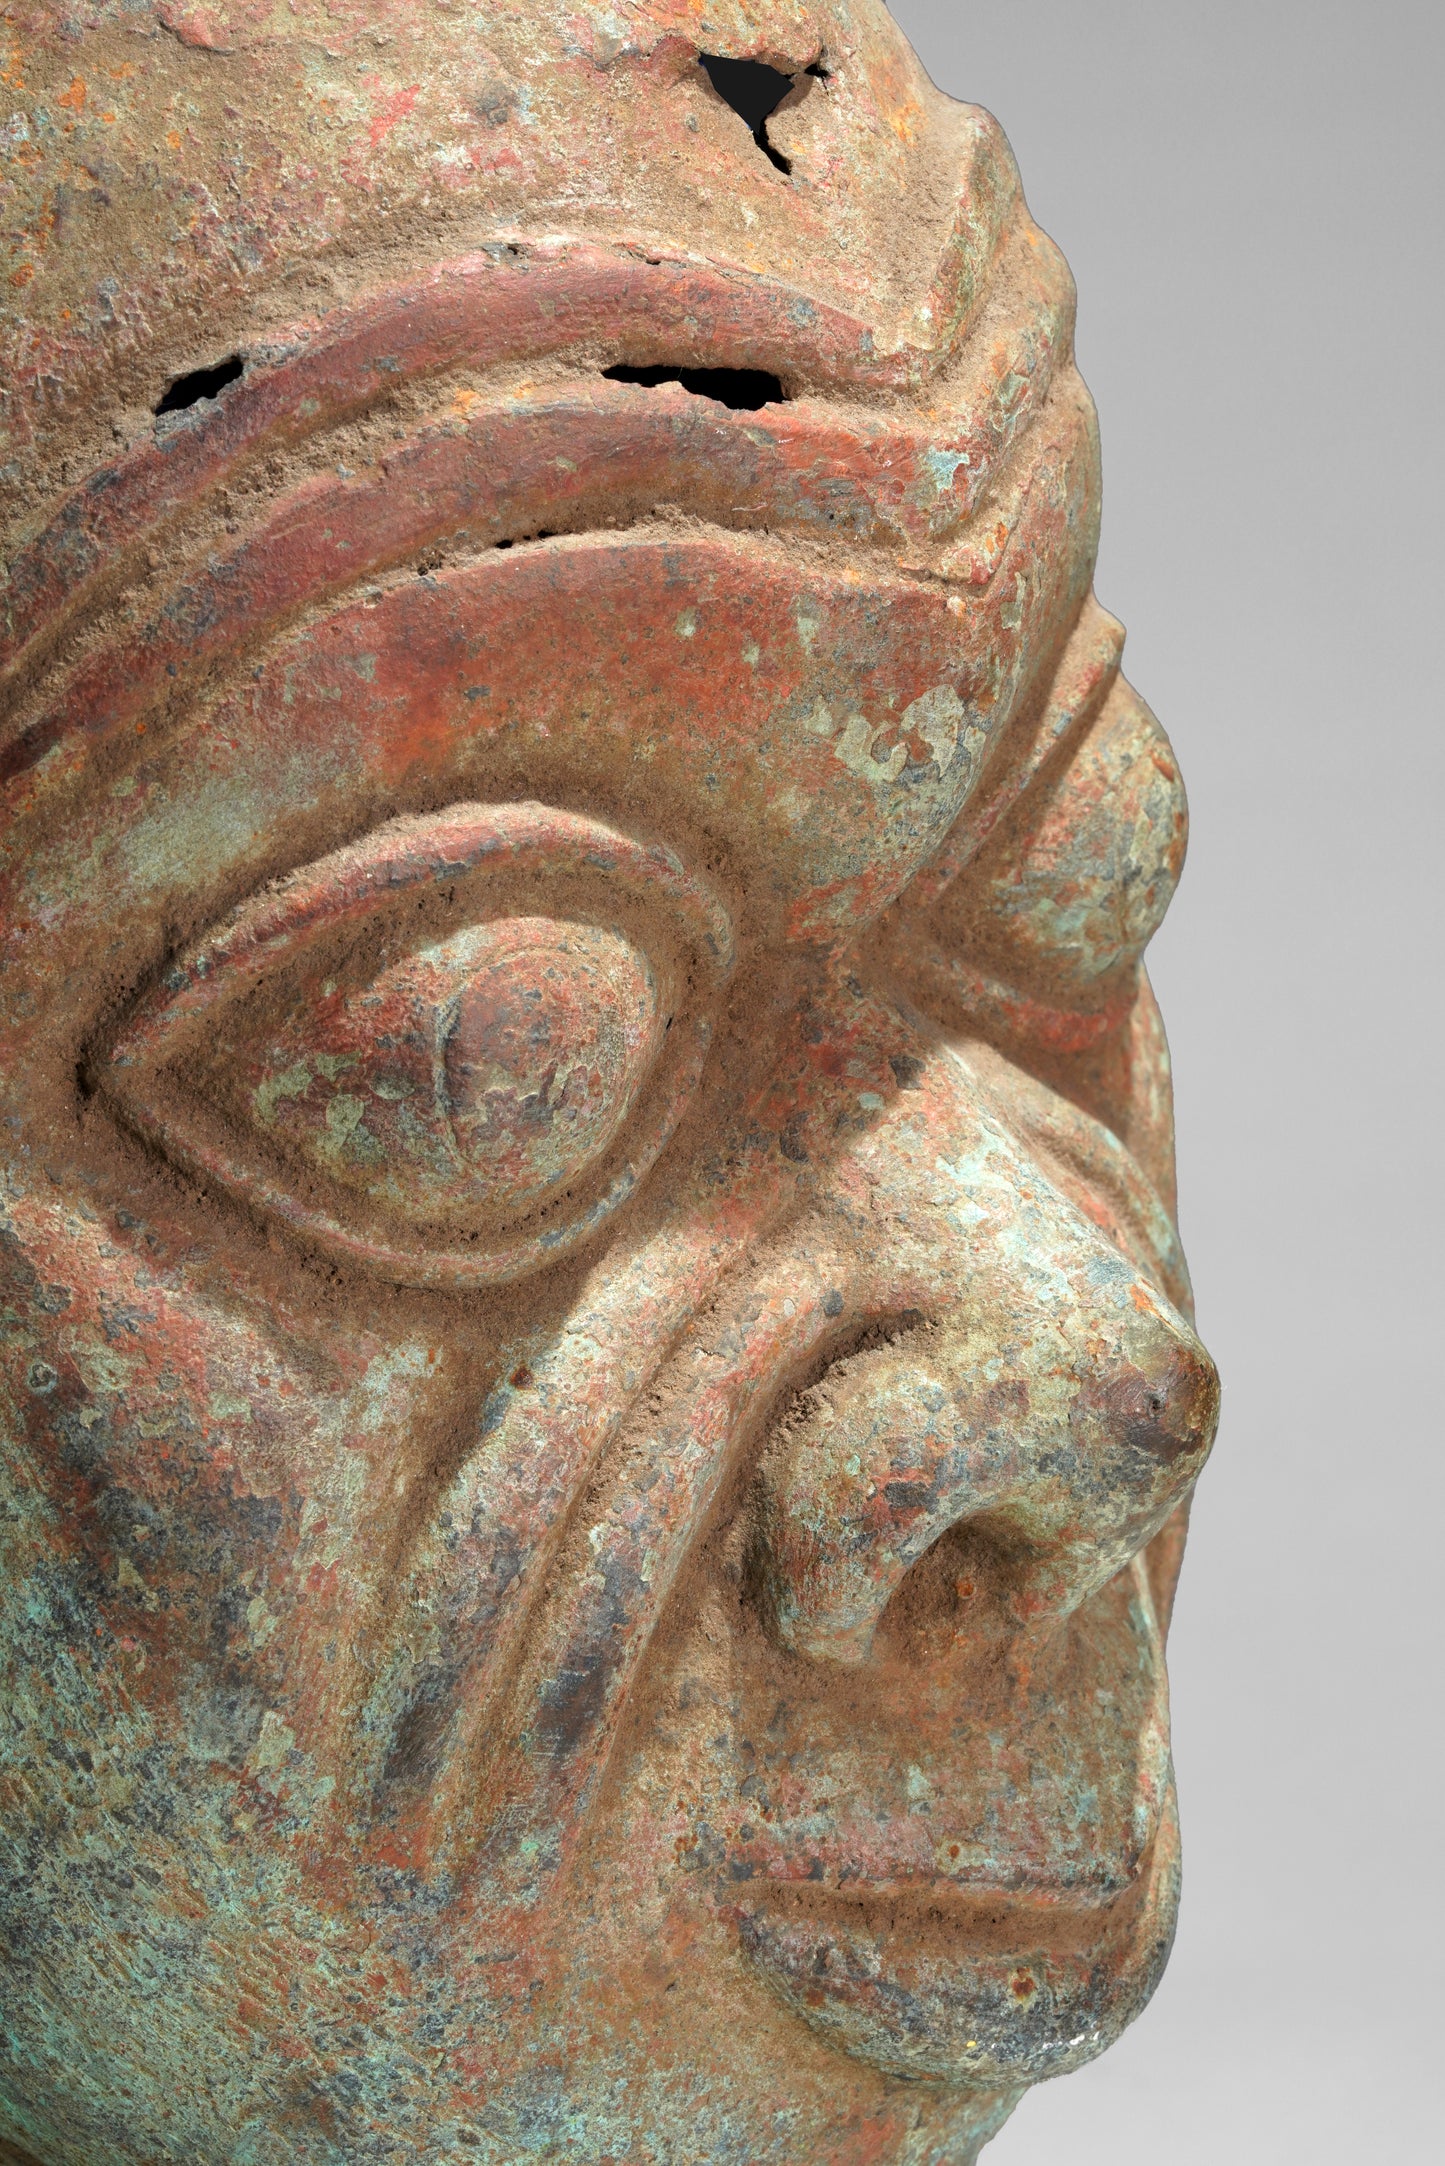 A bronze head in the style of Tada